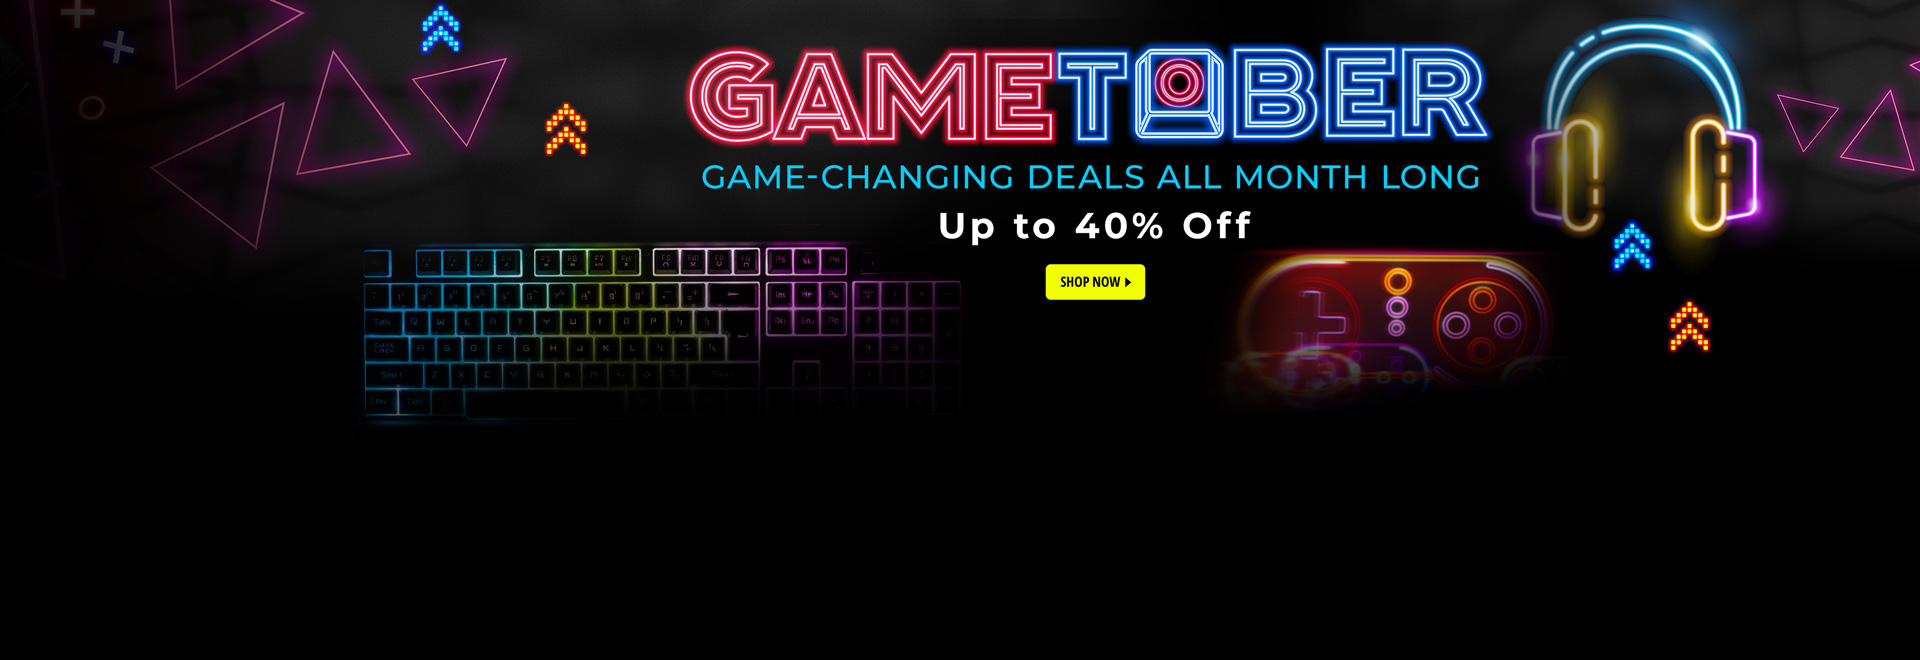 Gametober: Game-changing Deals All Month Long